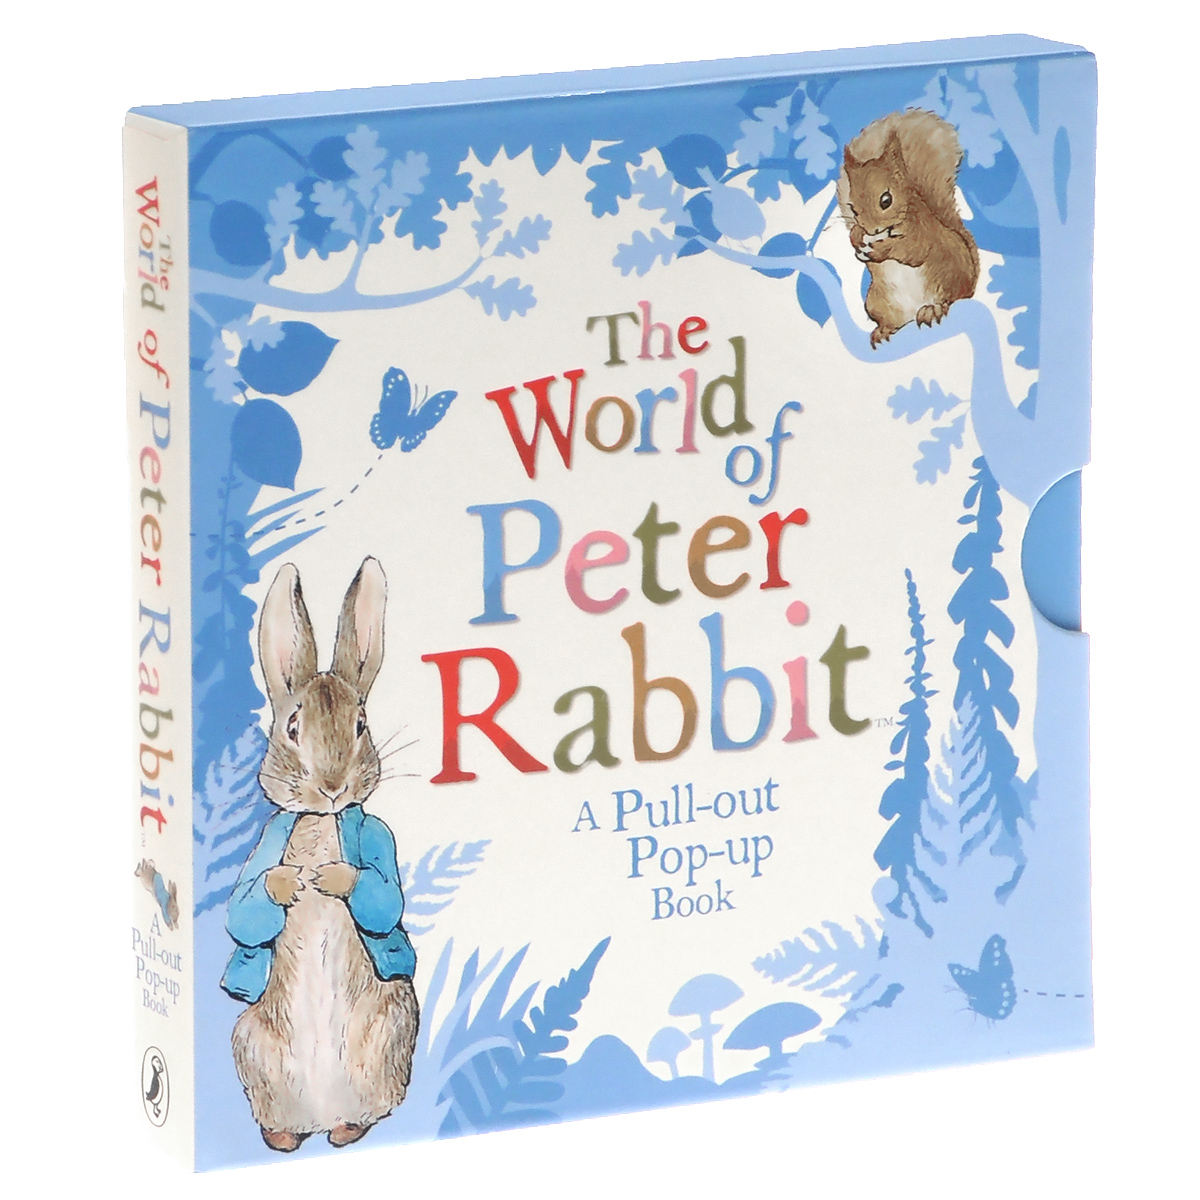 The World of Peter Rabbit: A Pull-Out Pop-Up Book